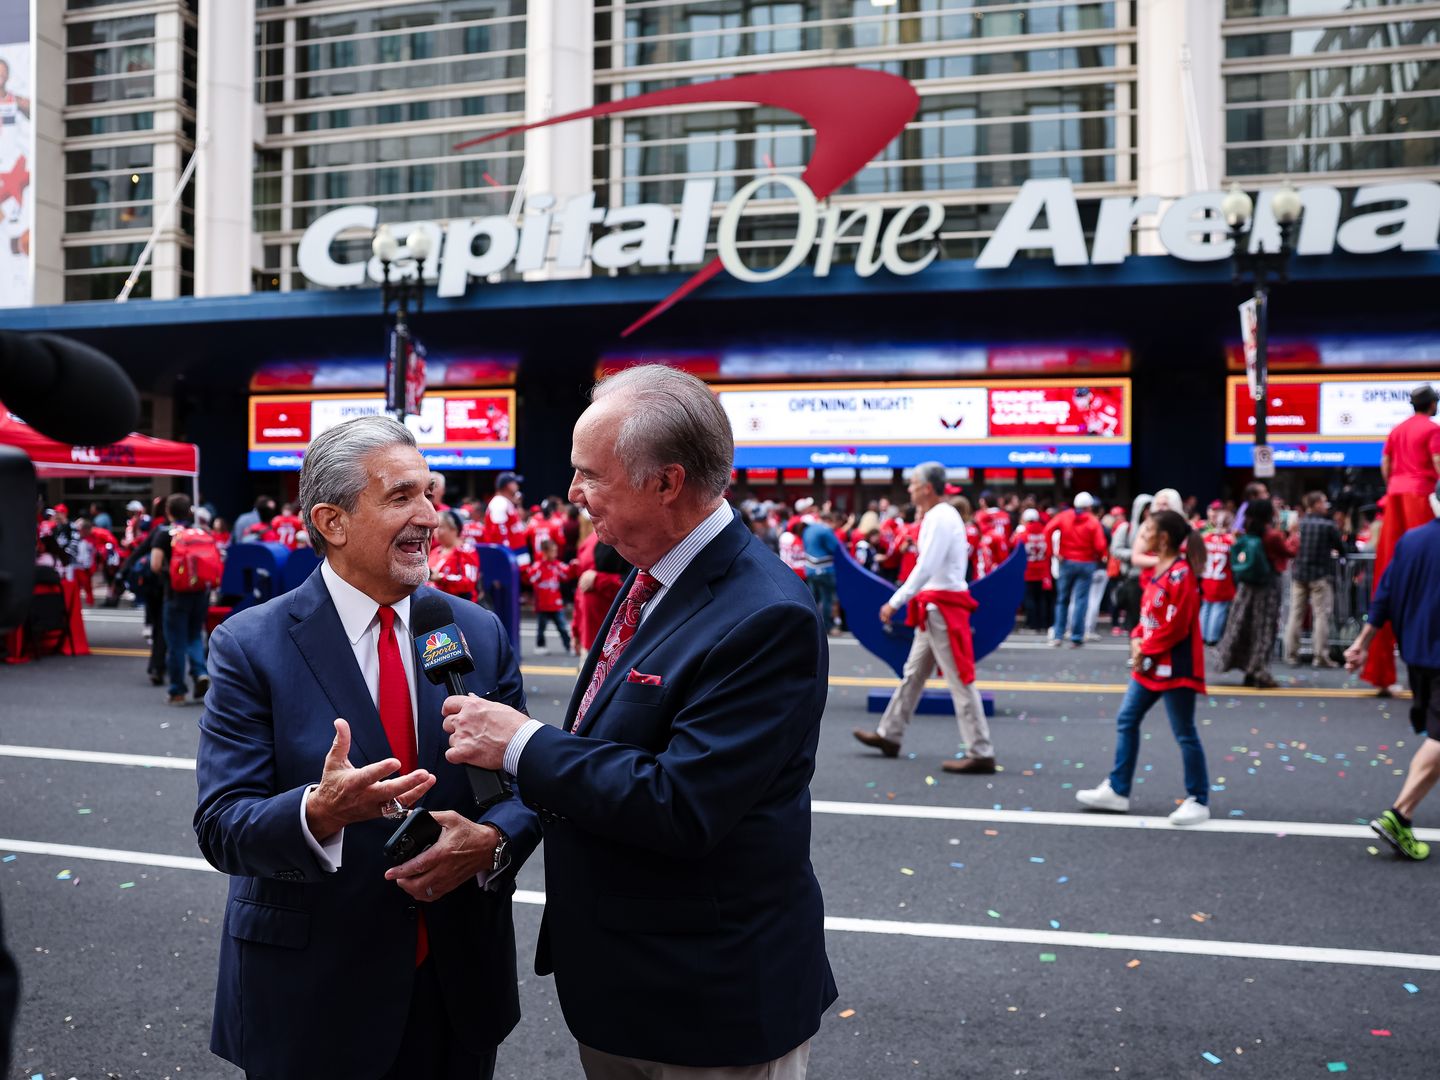 Monumental Sports increases security for Capital One Arena events